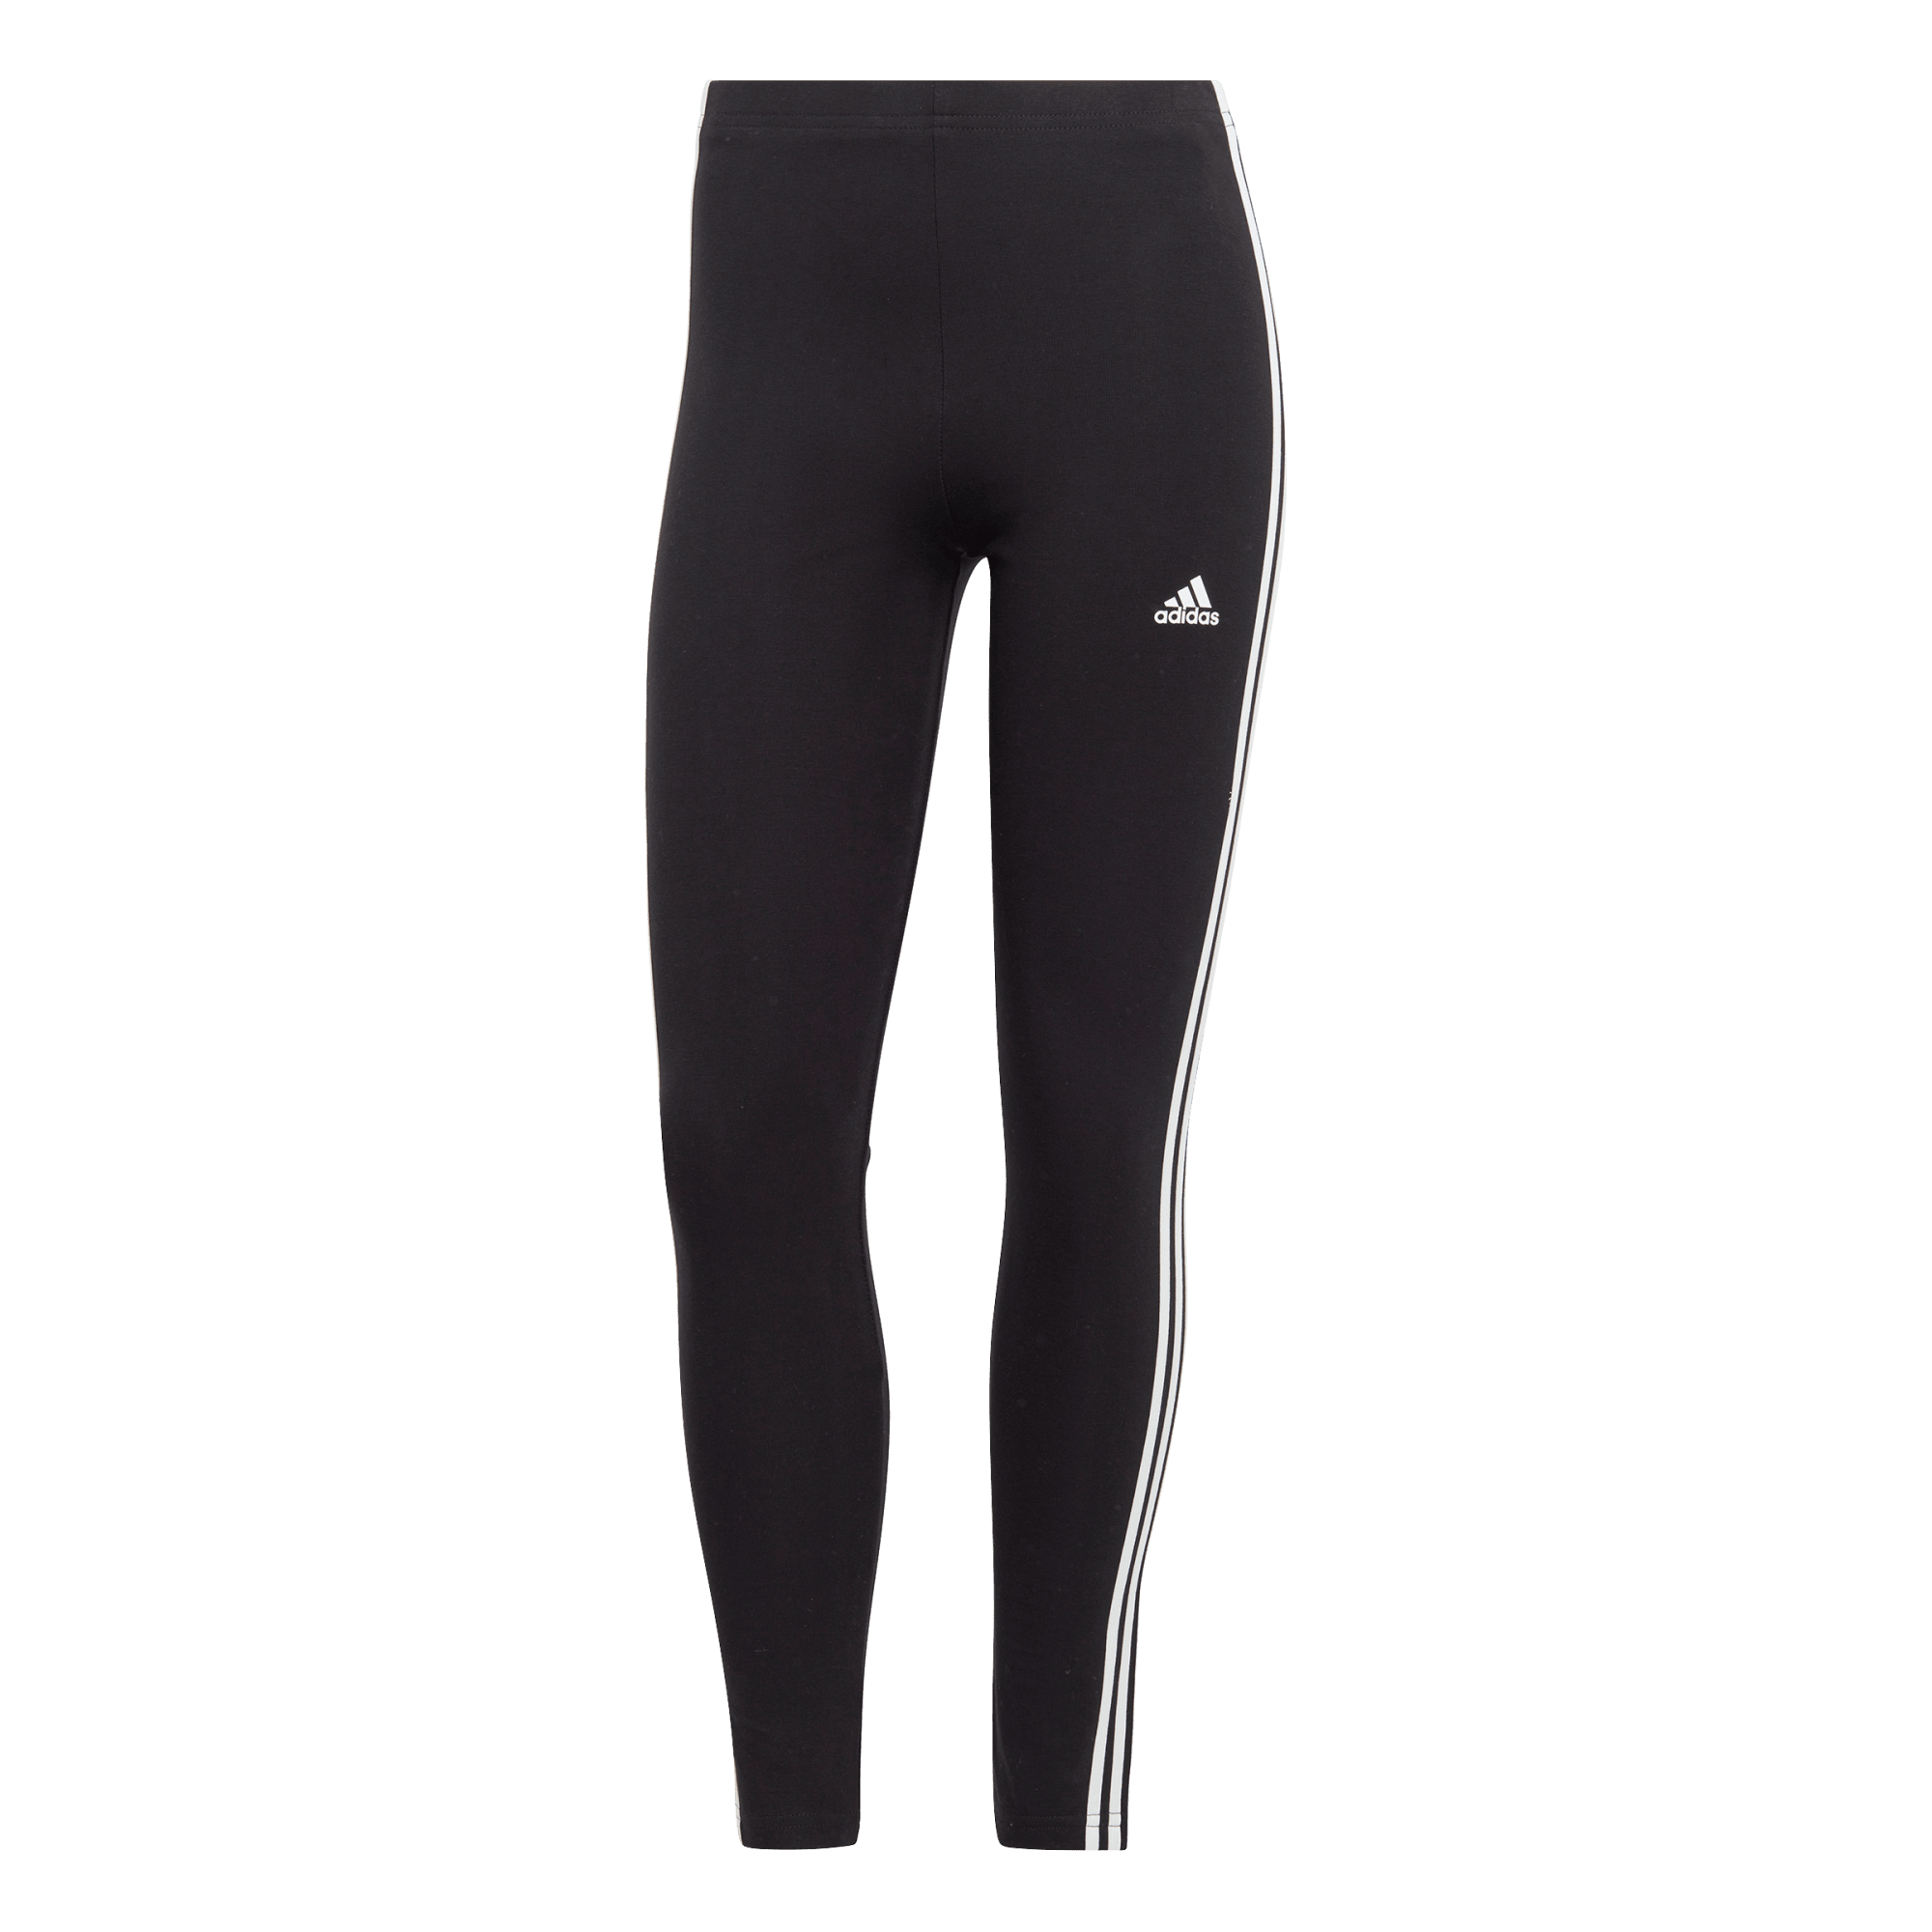 Women's 3-Stripes High-Waisted Legging from adidas